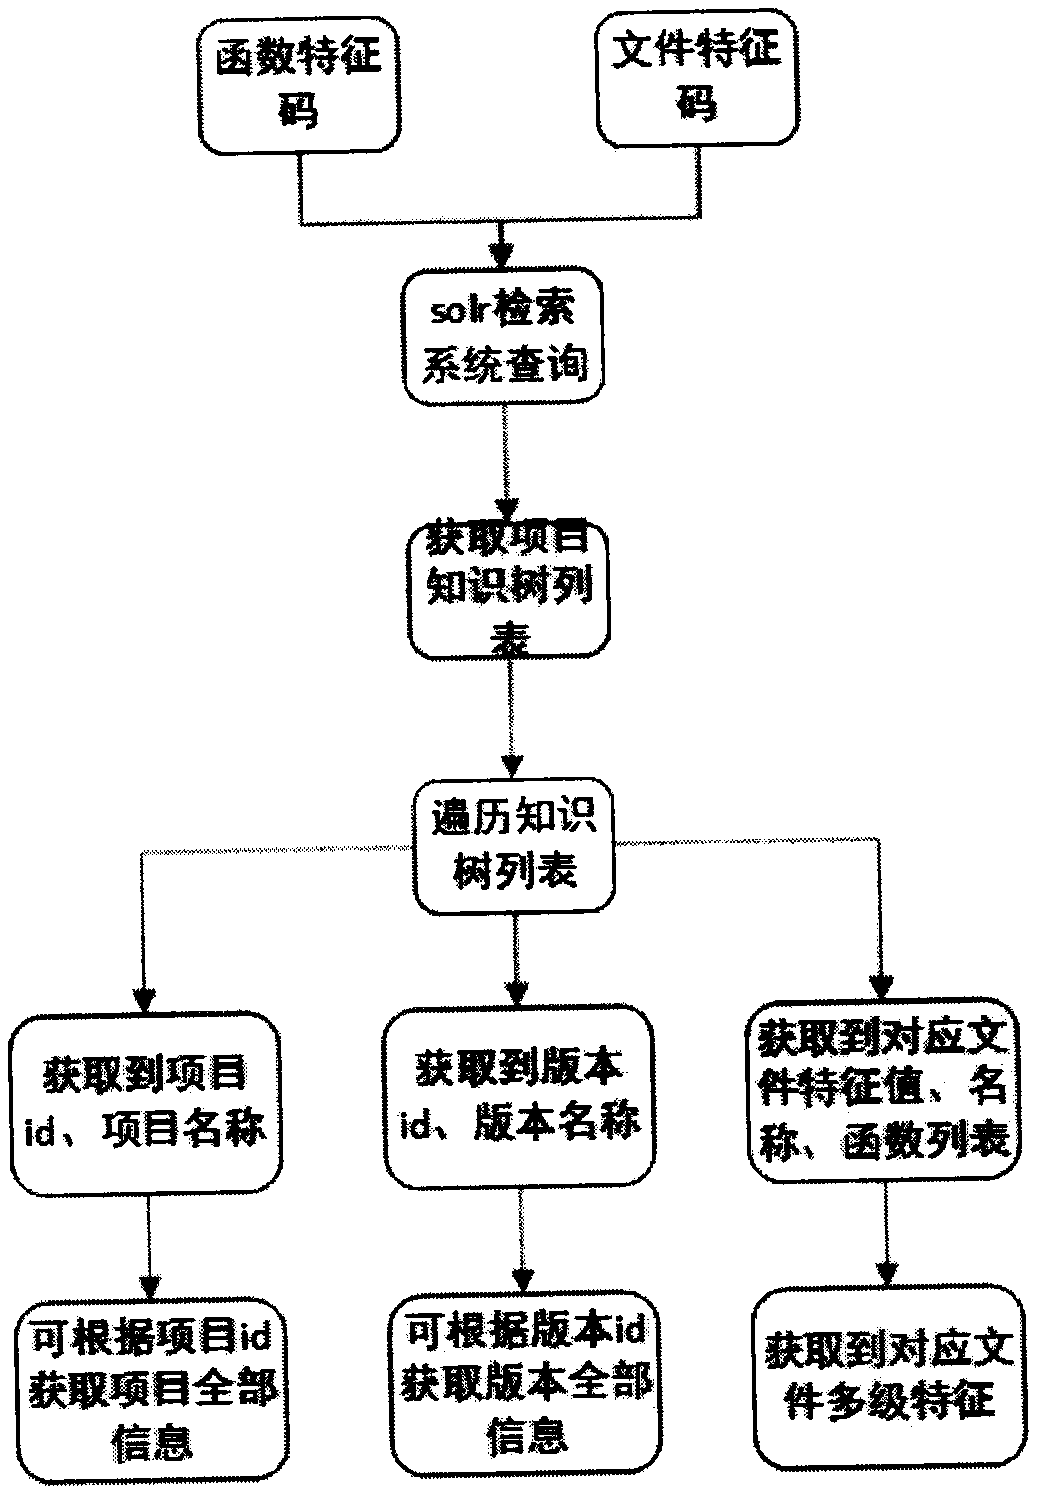 Project knowledge tree construction and retrieval method